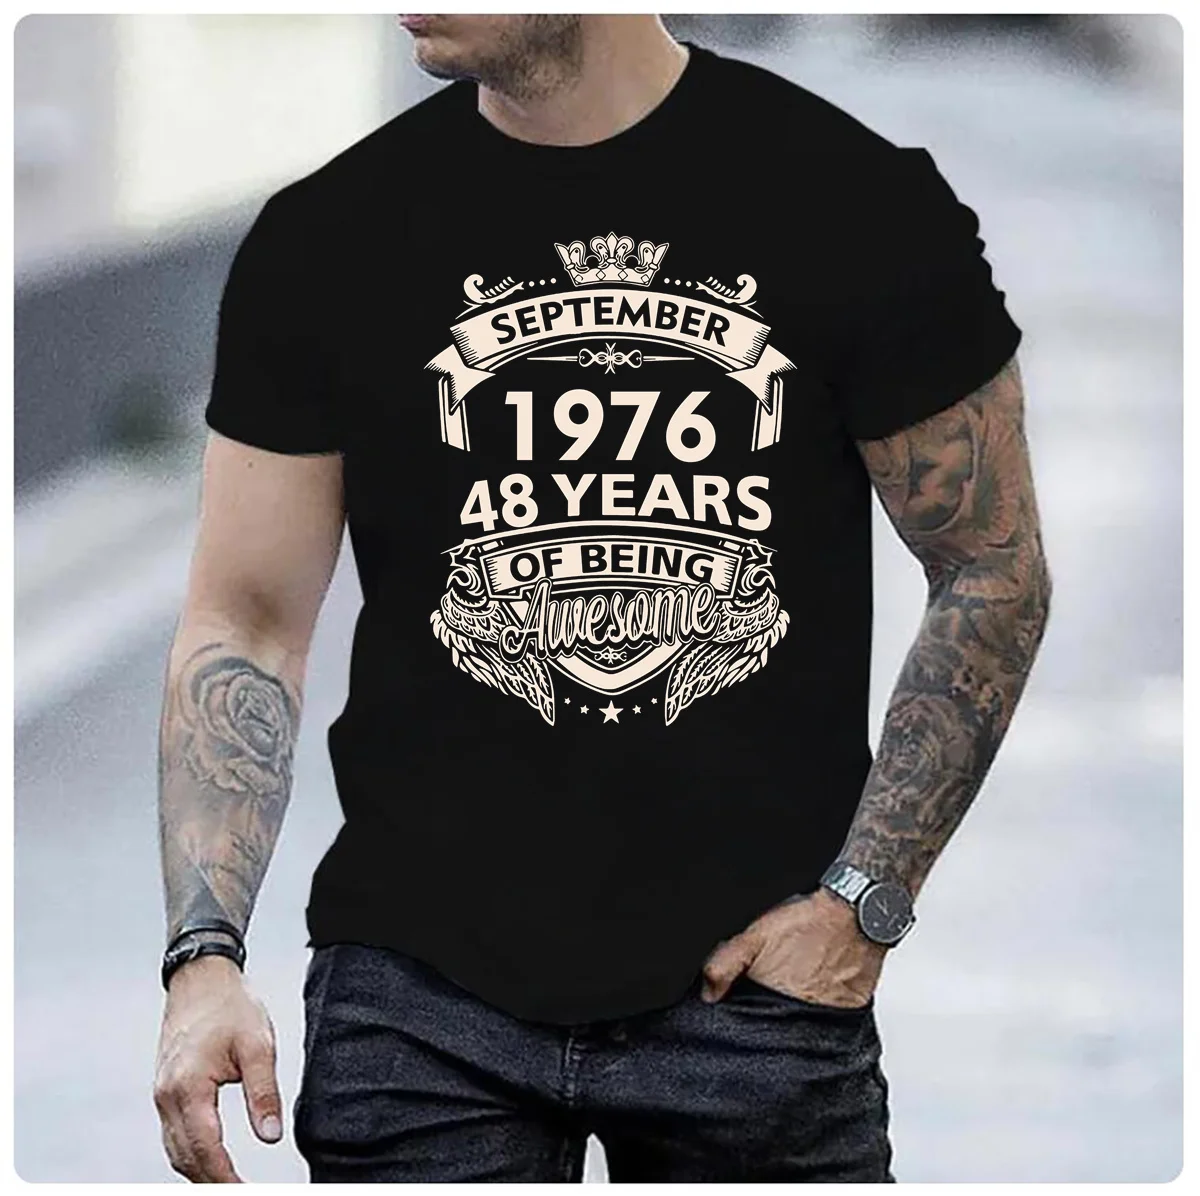 Born 1976 48 Years of Being Awesome November September October December January Febuary March April May June July August T-Shirt